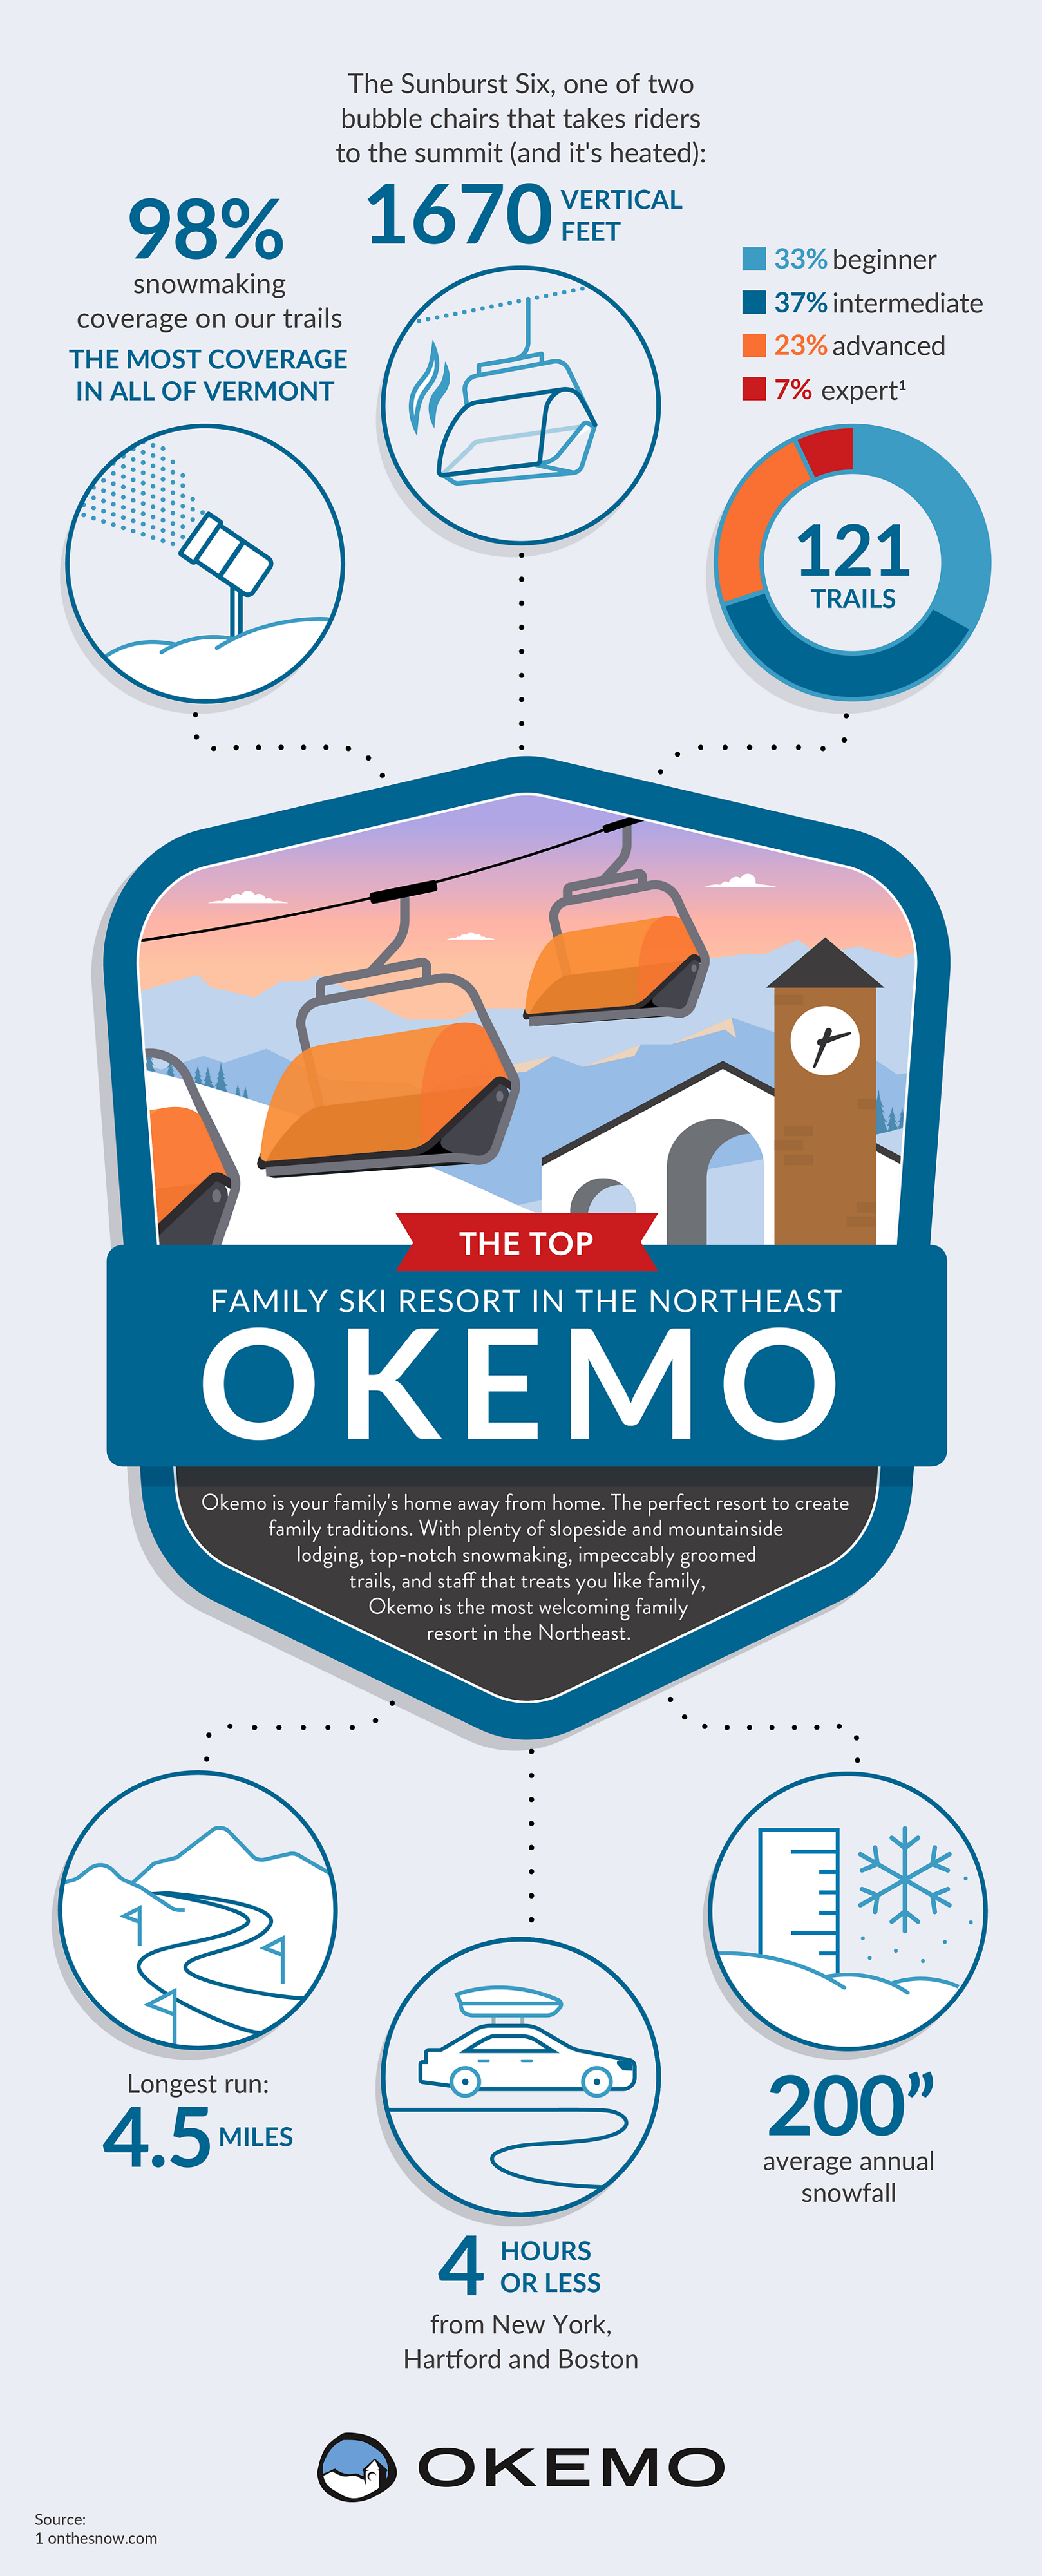 An infographic covering the breadth of Okemo's terrain including 1670 vertical feet, 127 trails, and 200 + inches of snow. Also, Okemo's proximity to New York, Connecticut, and Boston in under4 hours. 